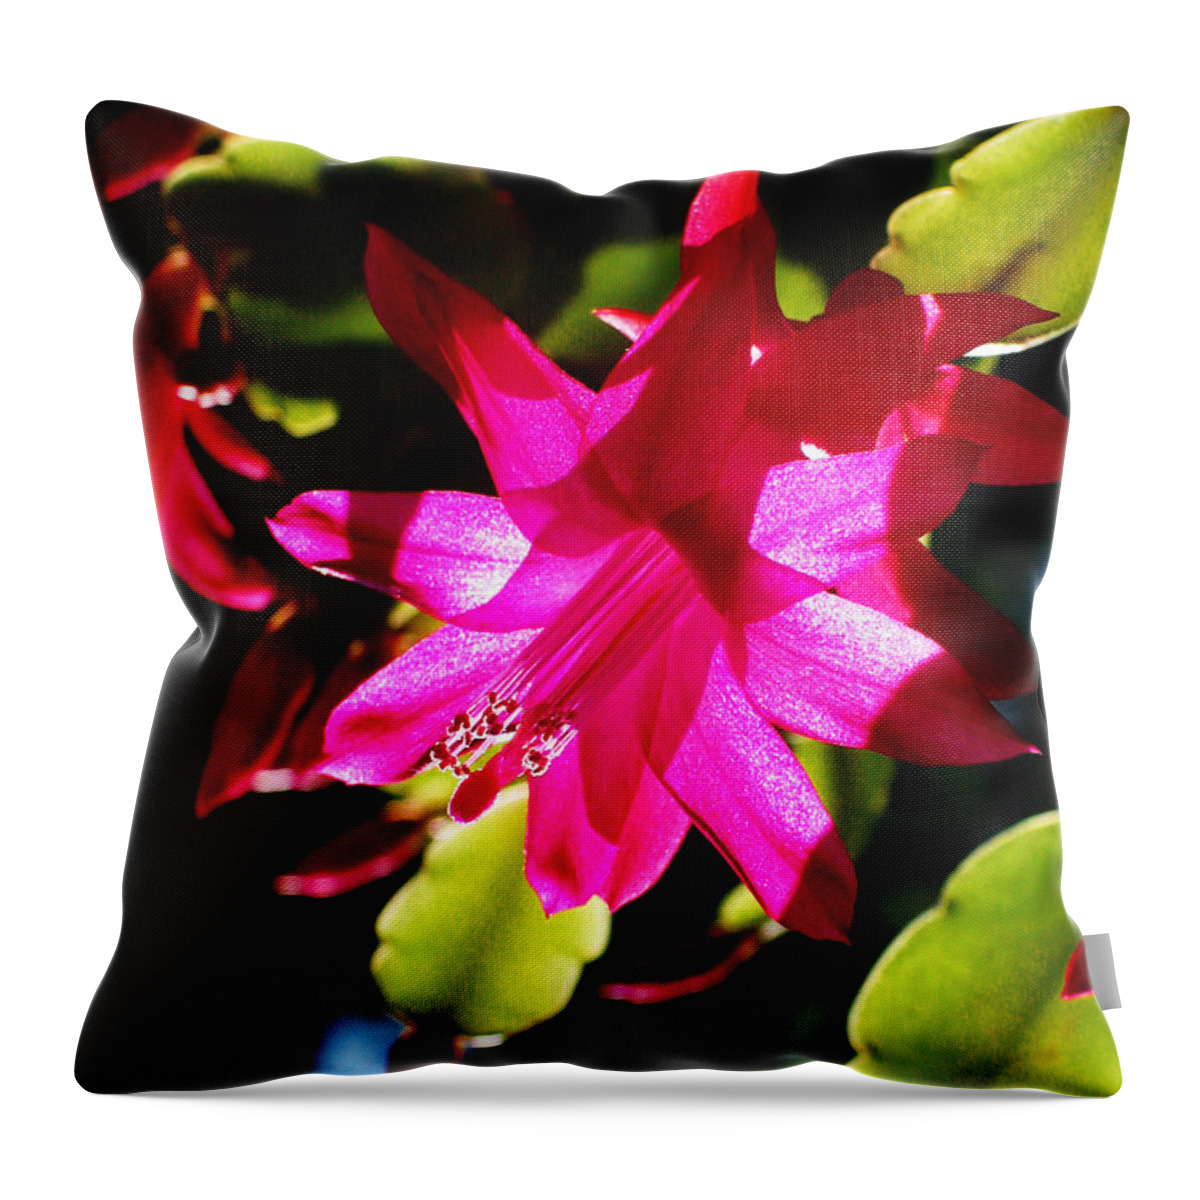 Cactaceae Throw Pillow featuring the photograph Spring Blossom 15 by Xueling Zou